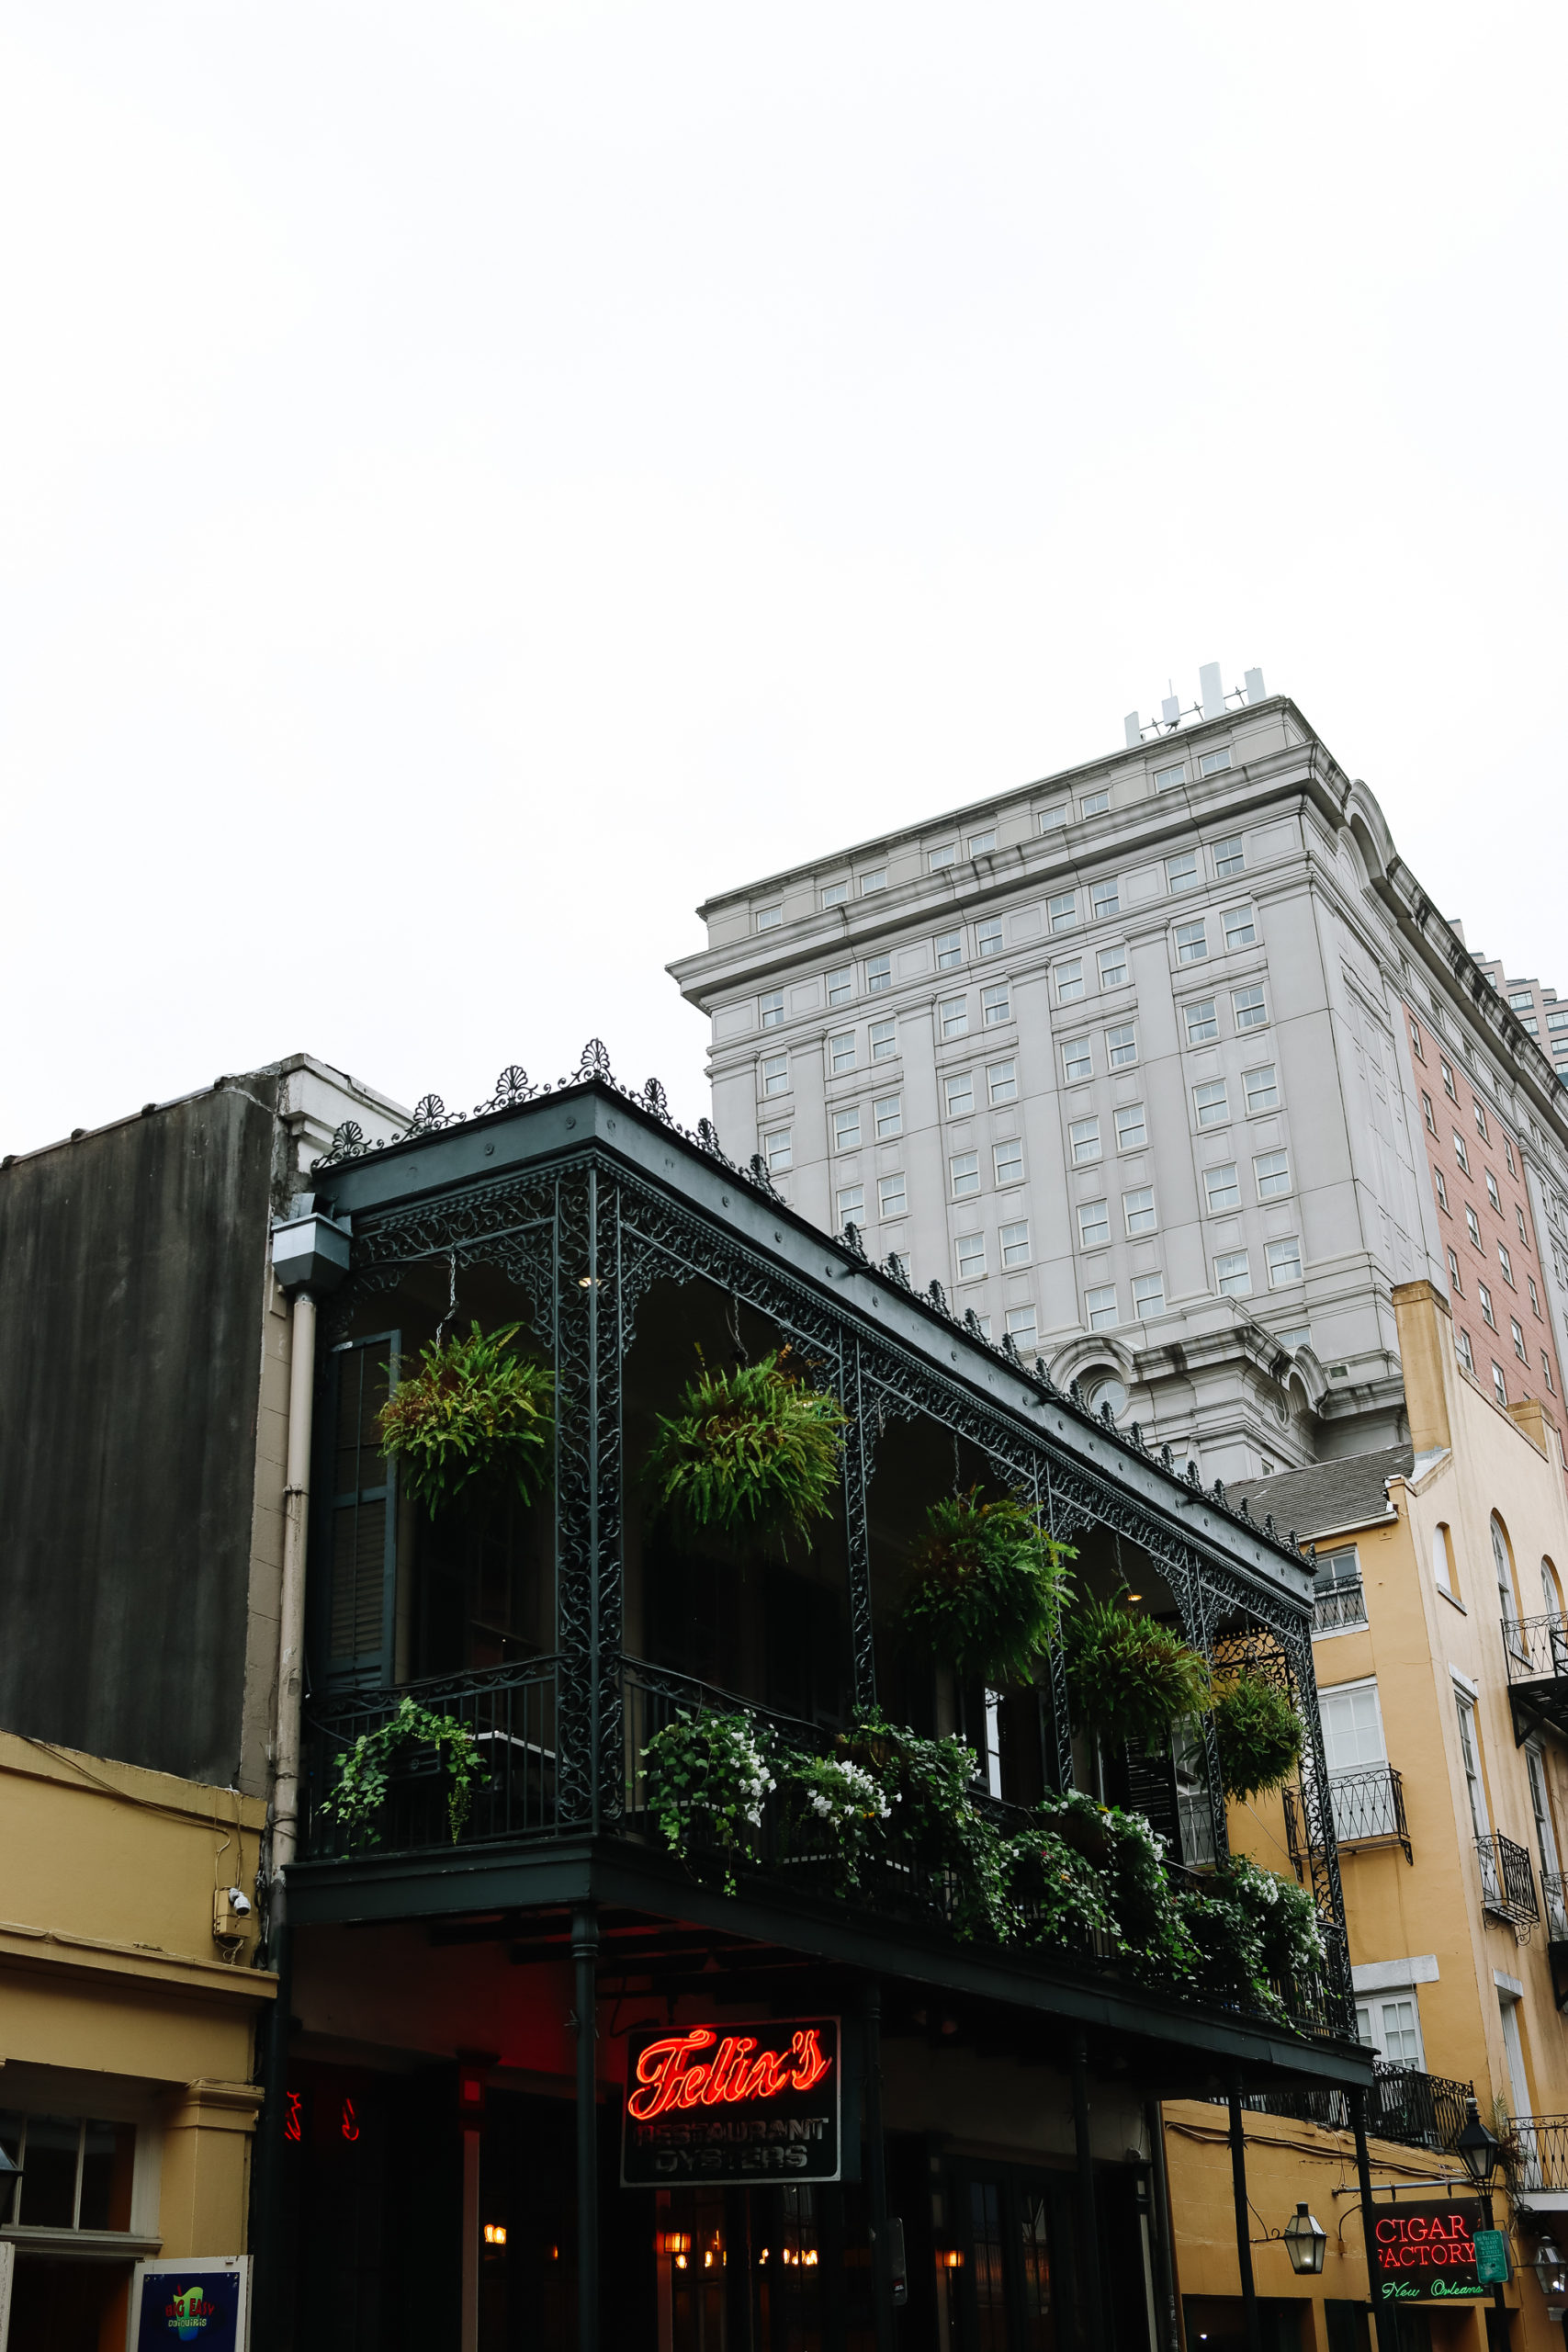 15 Things to Do in New Orleans